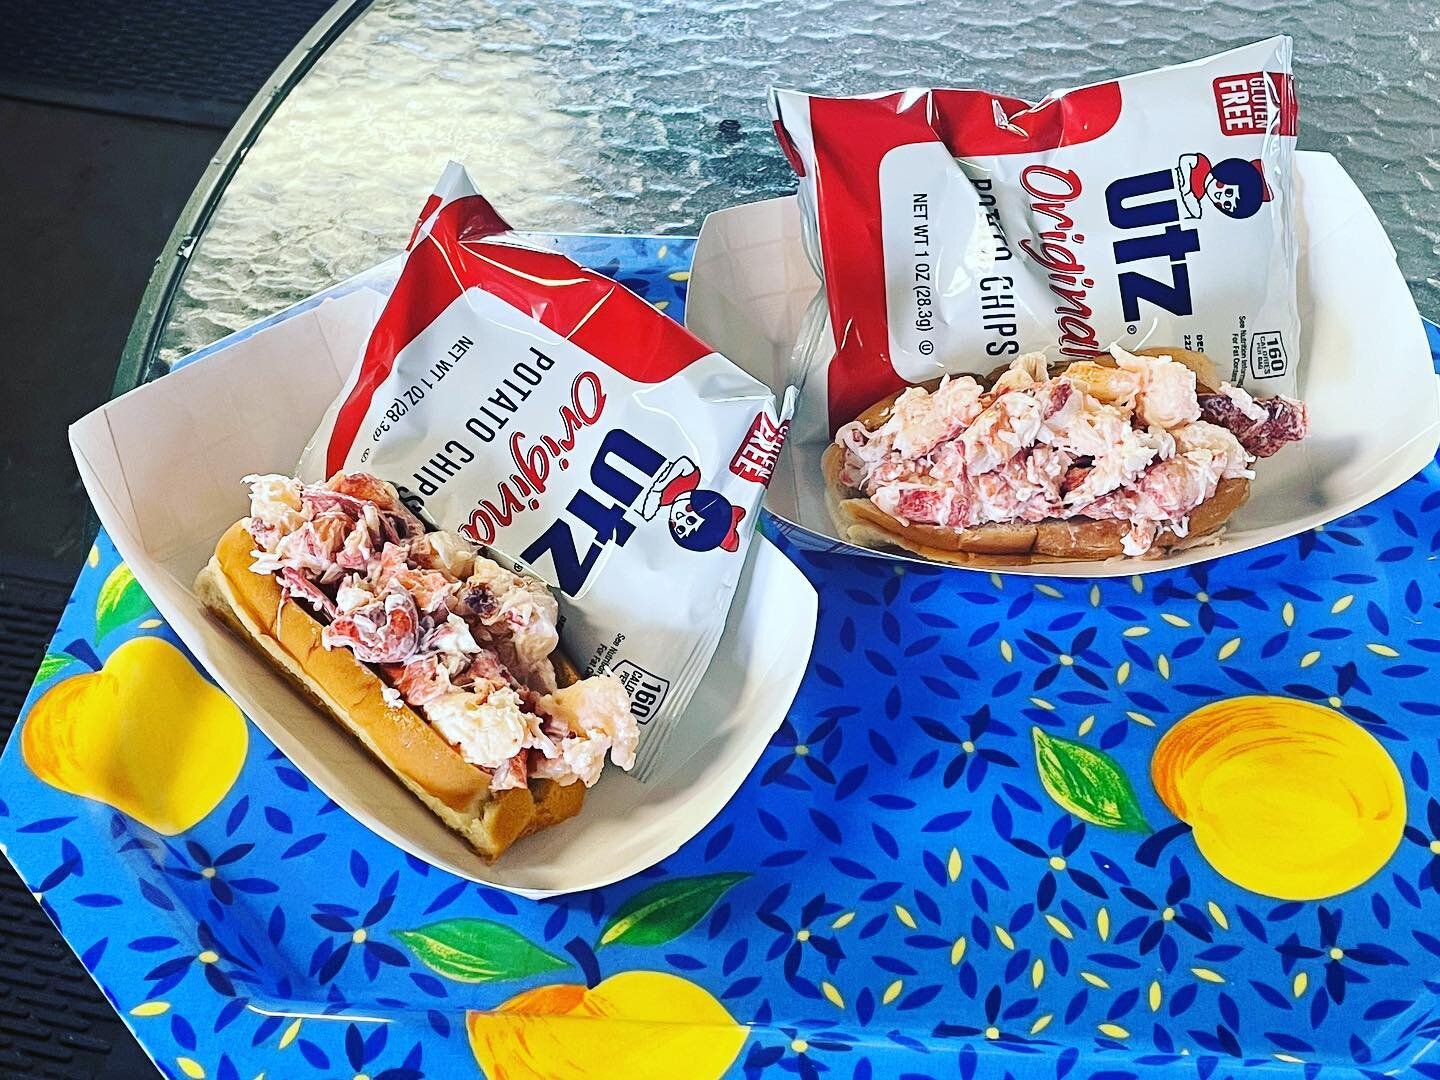 Yummy lobster rolls with fresh picked lobster meat served with Mayo or drawn butter.